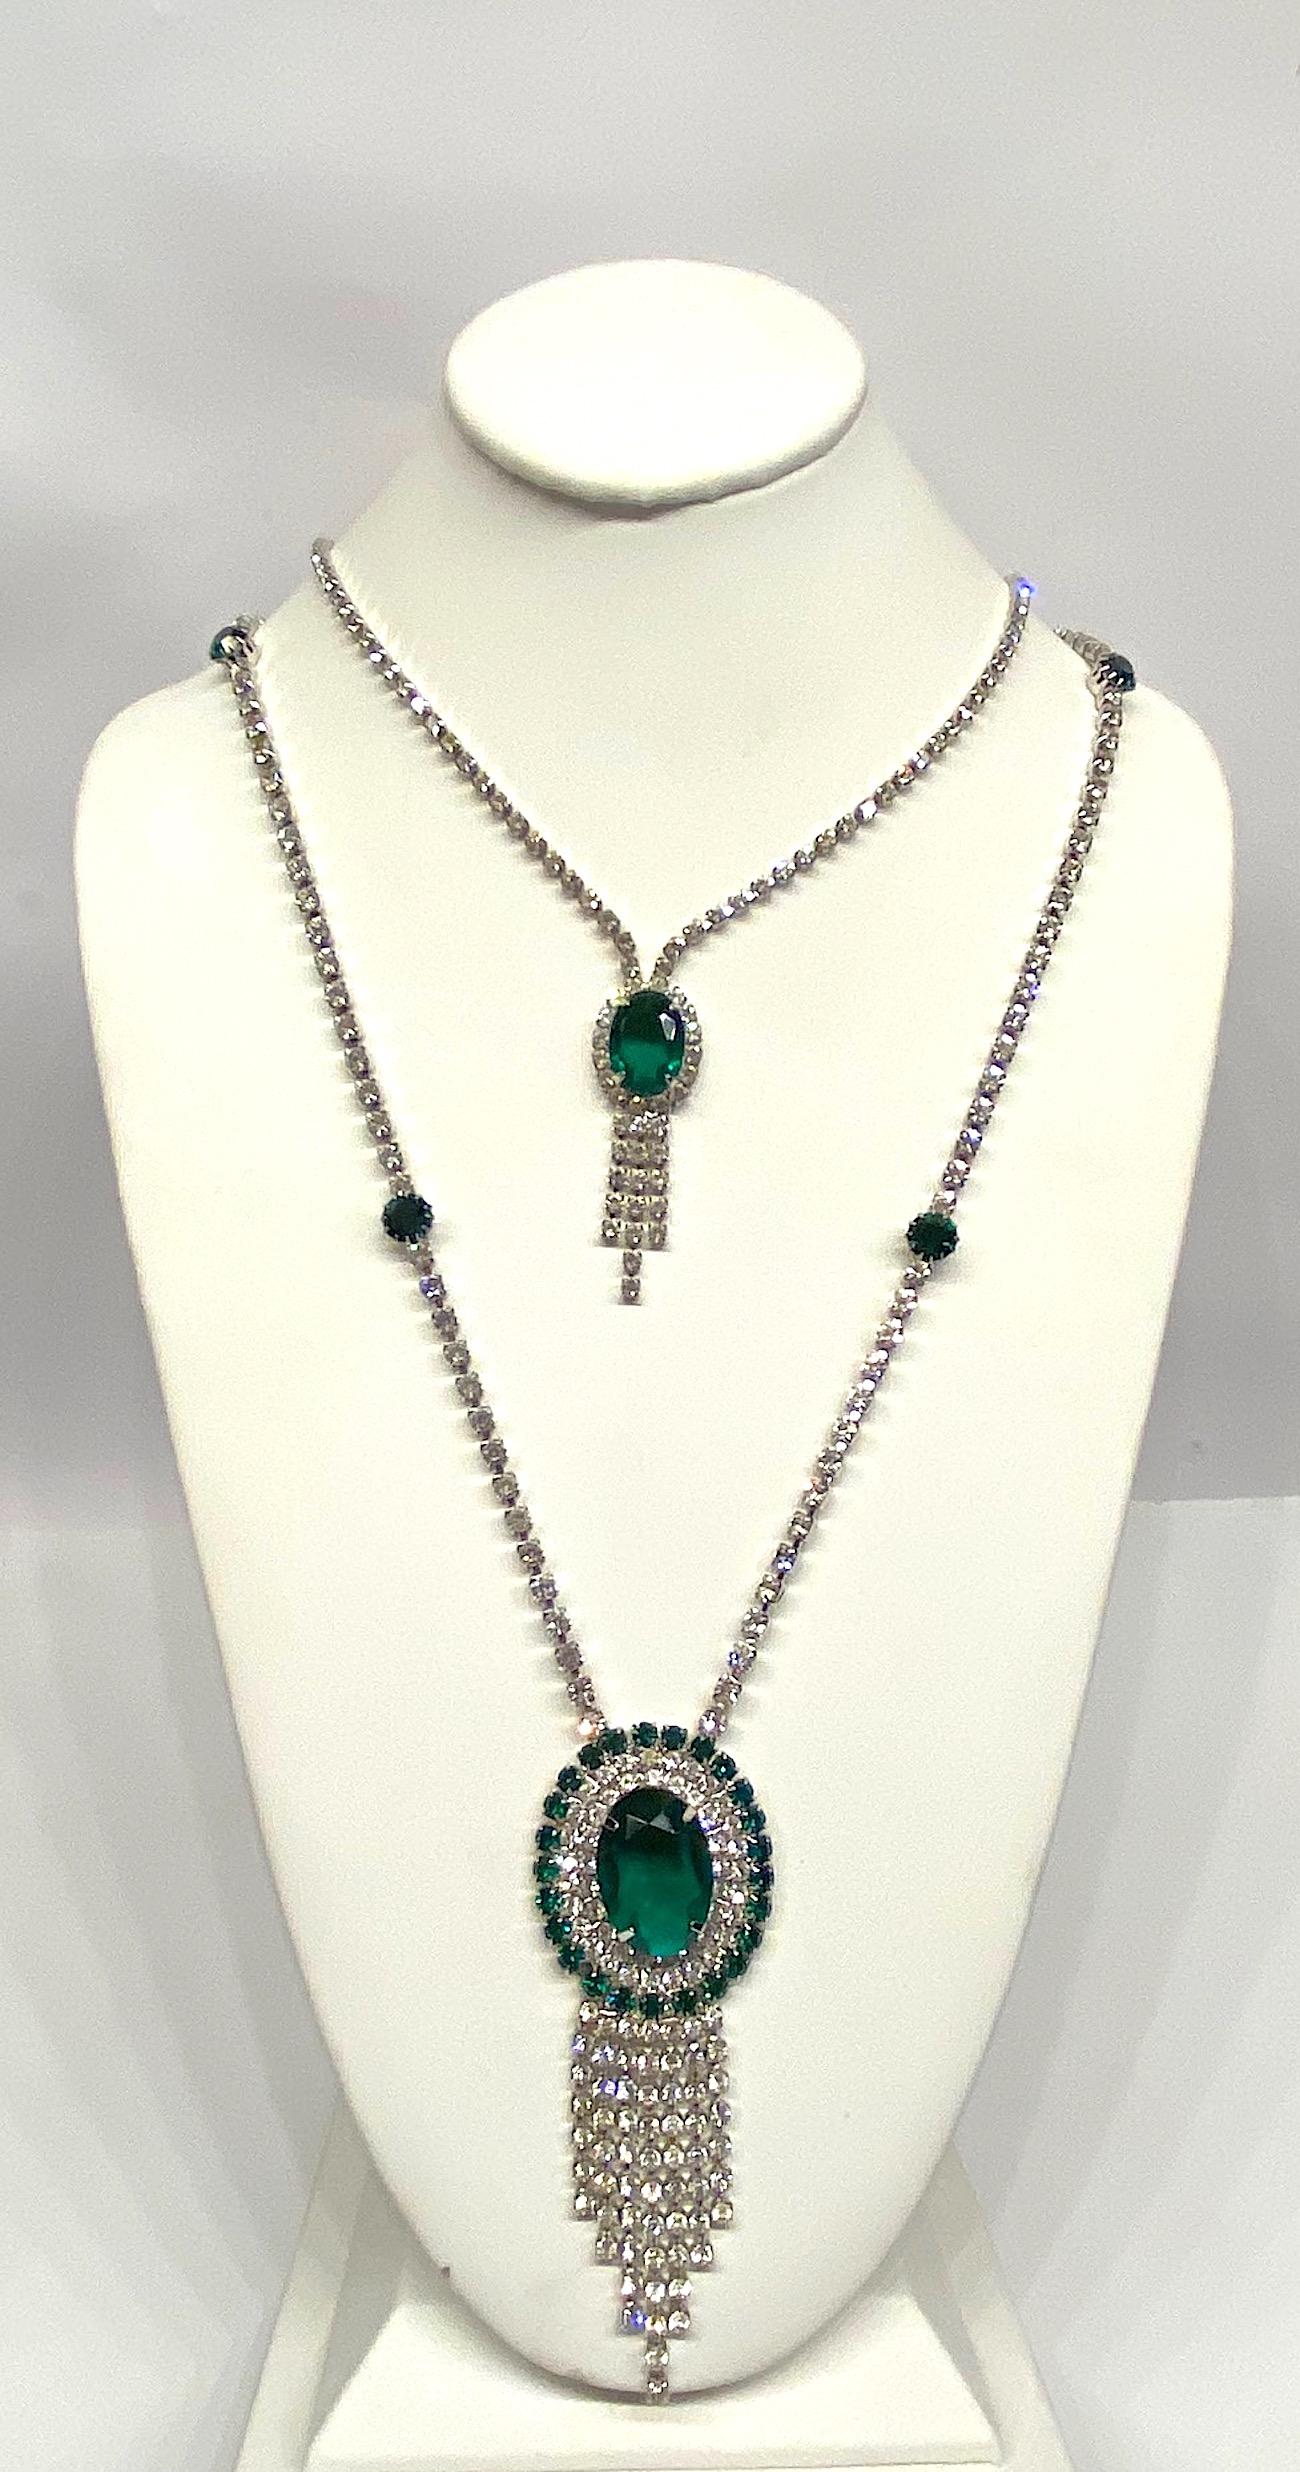 1950s / 1960s Emerald Green Crystal & Rhinestone Double Pendant Necklace 3